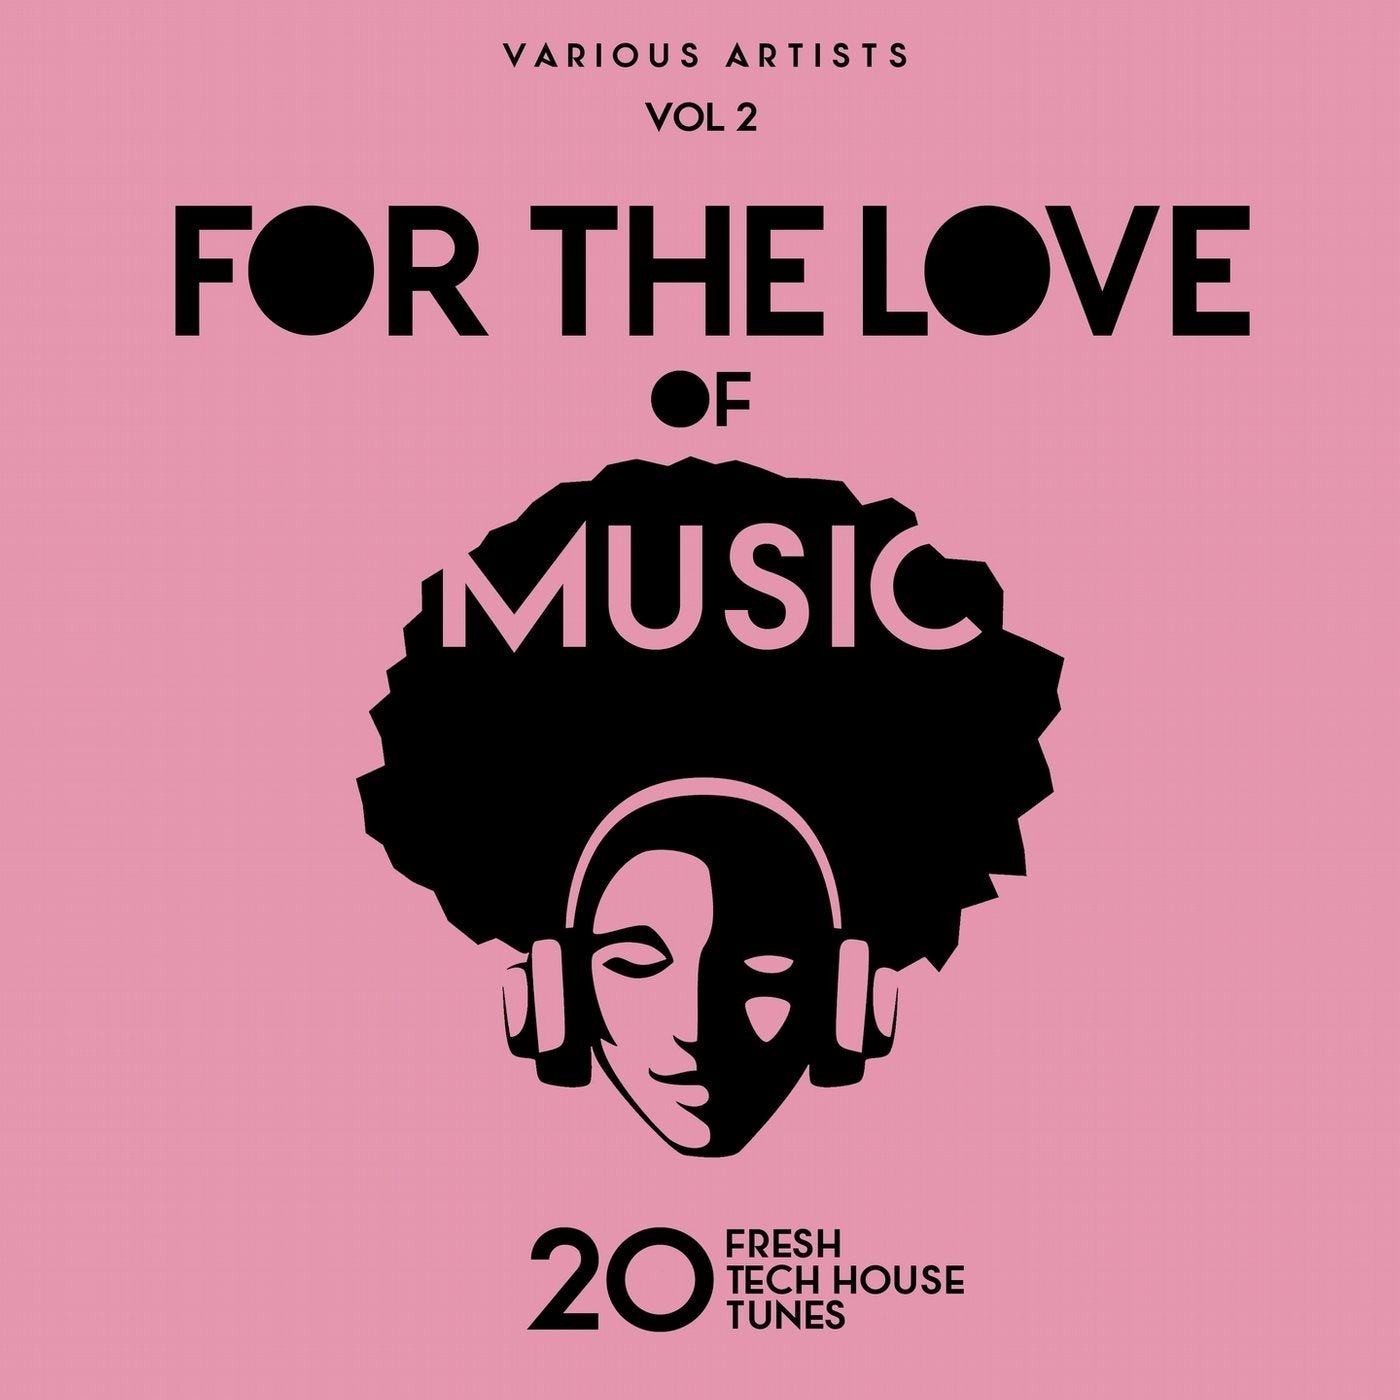 For The Love Of Music (20 Fresh Tech House Tunes), Vol. 2